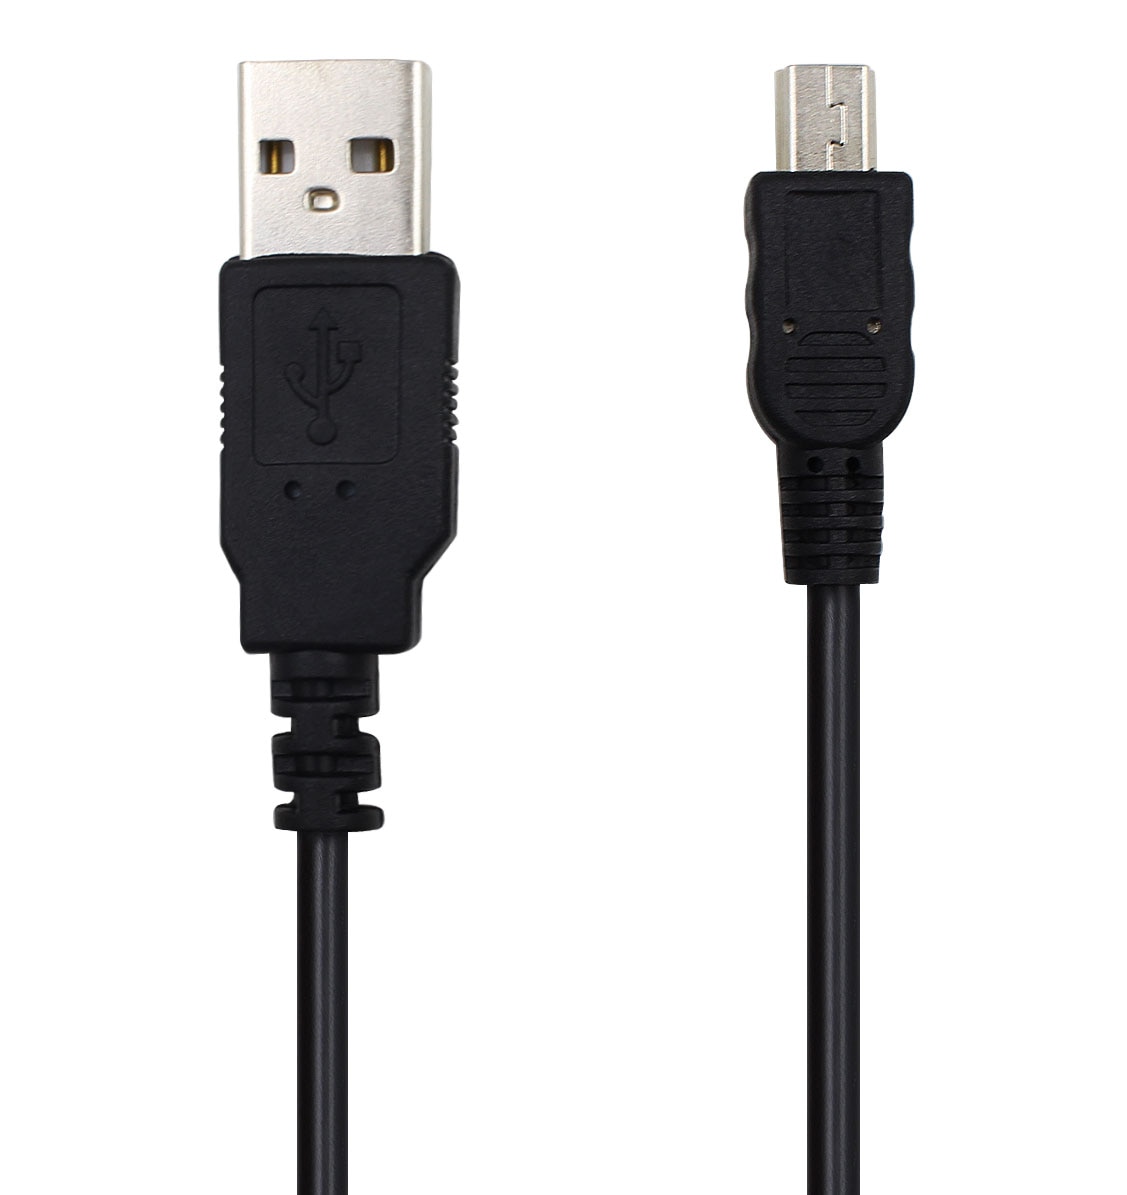 USB SYNC PC DATA CABLE KOORD VOOR BLAUW YETI MICROFOONS OPNAME